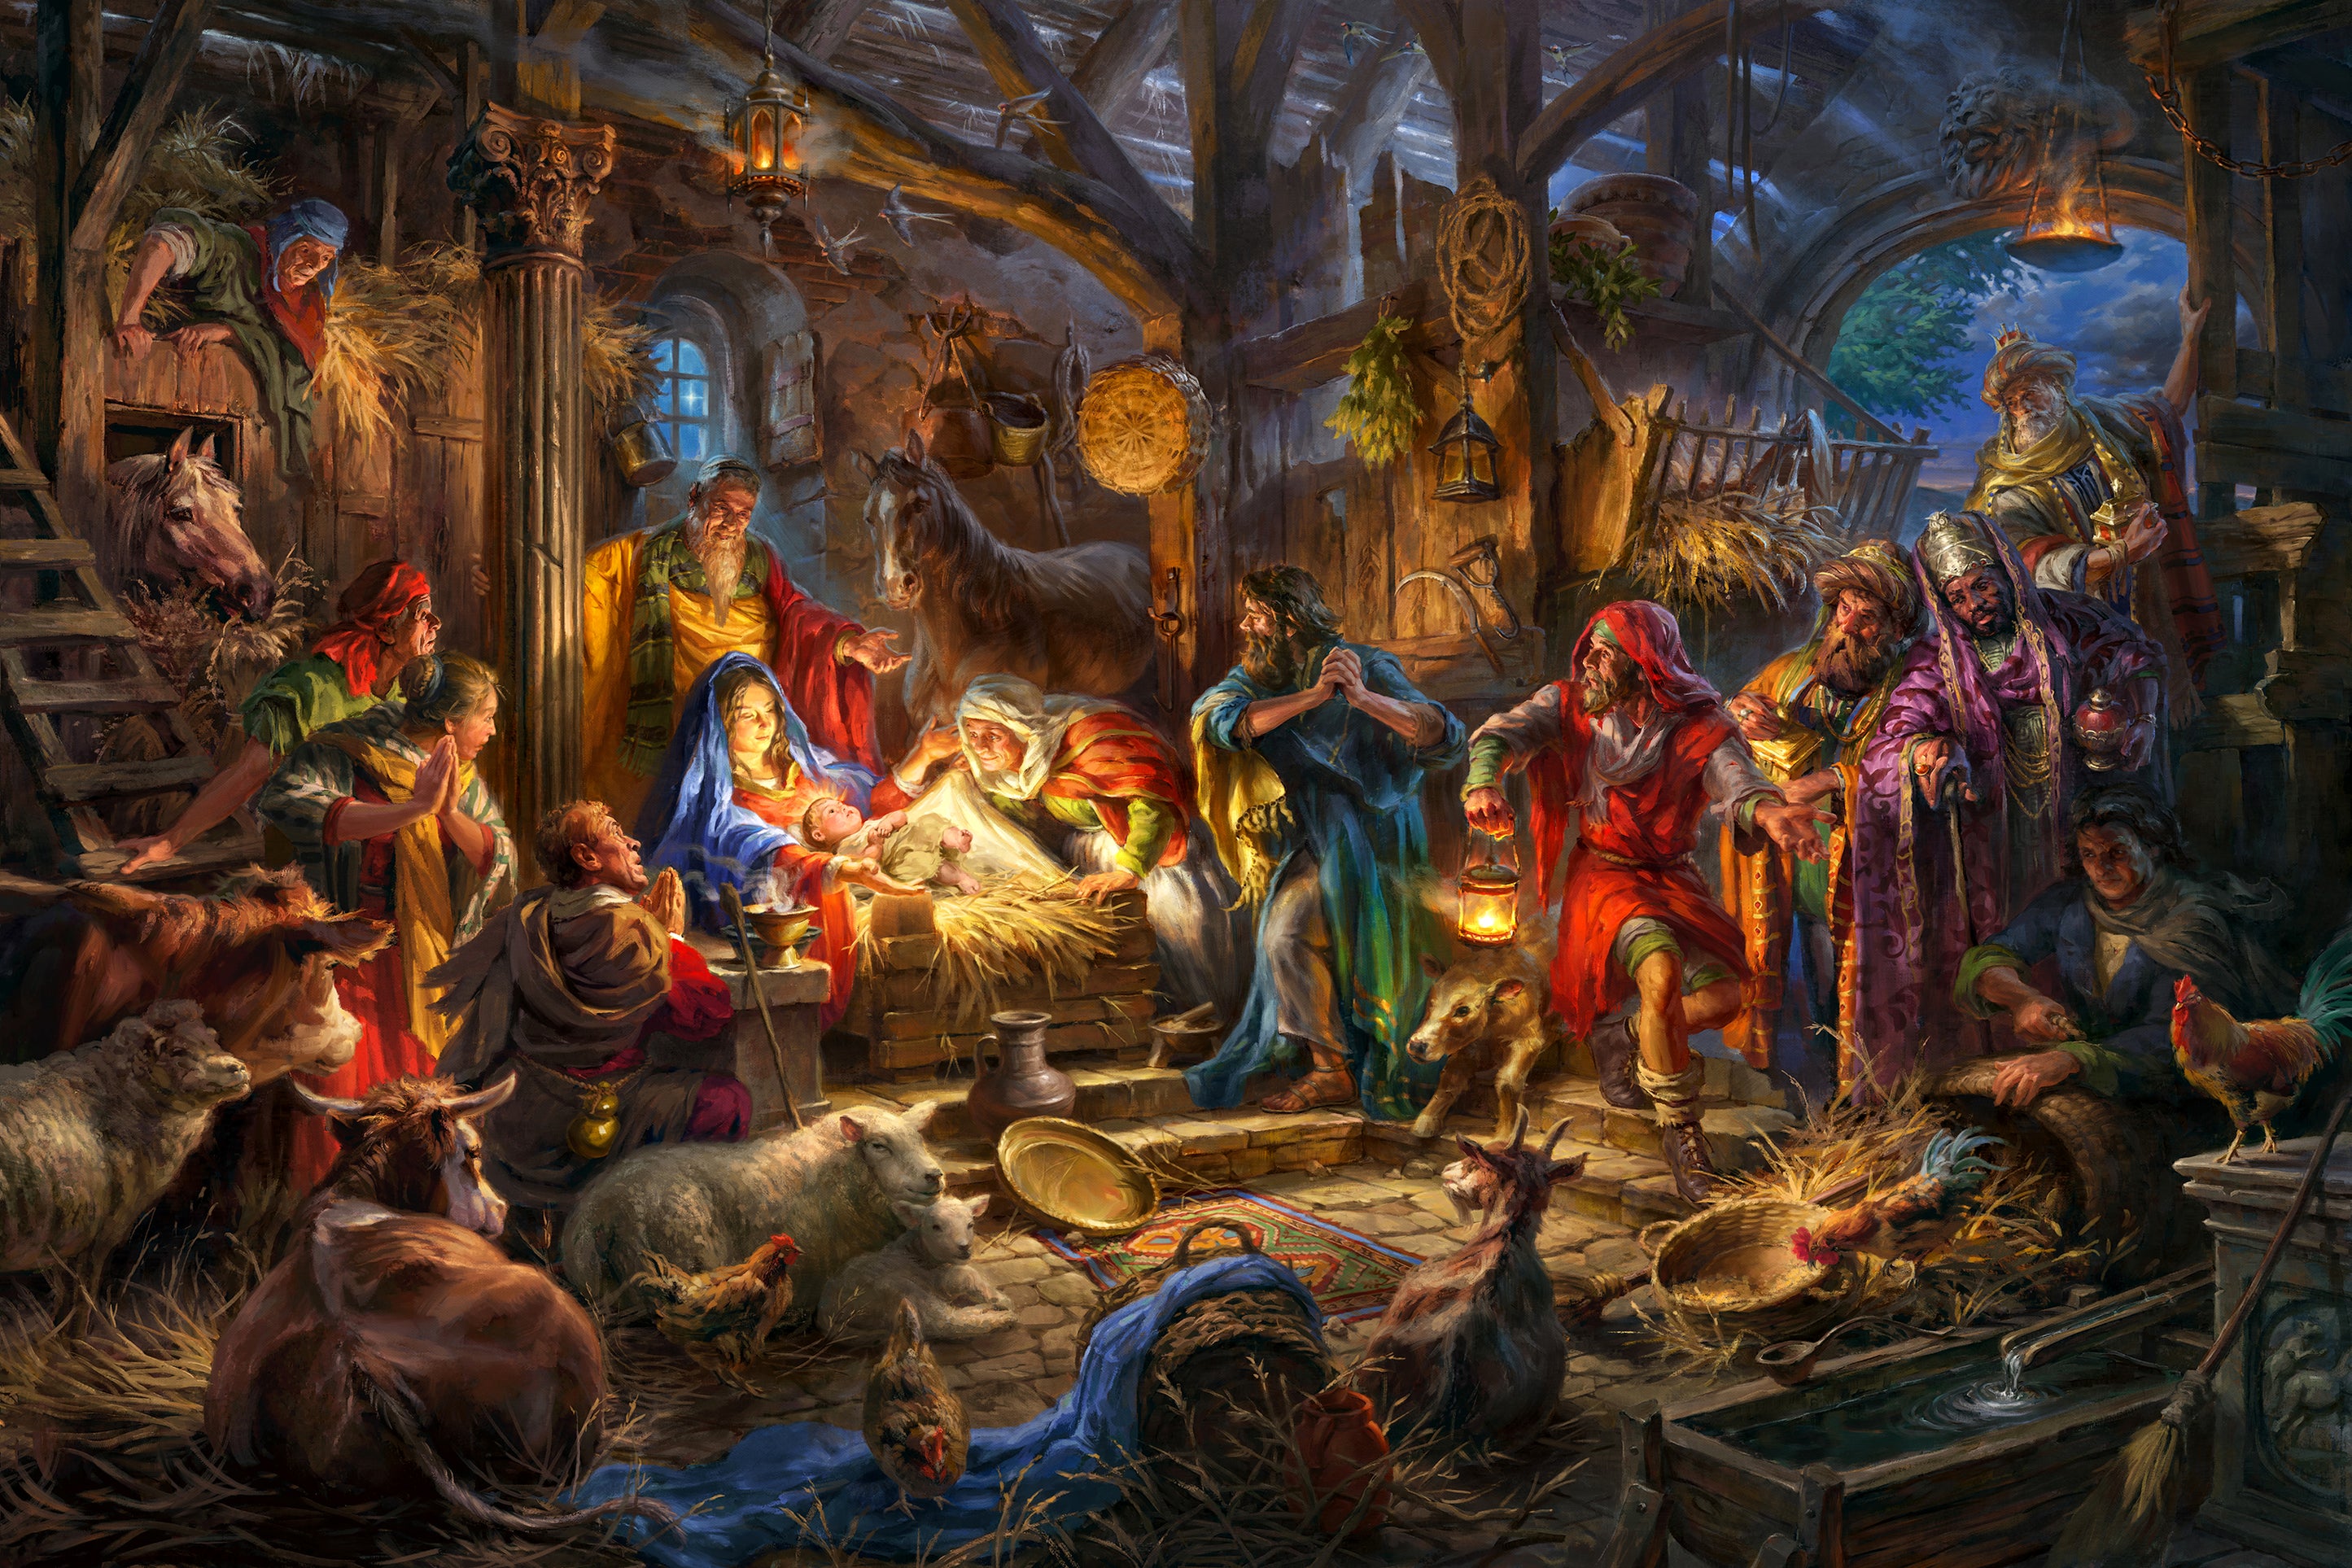 nativitas - nativity, the birth of jesus christ born in a manger with three kings bringing gifts for christmas painted by Blend Cota from Blend Cota Studios